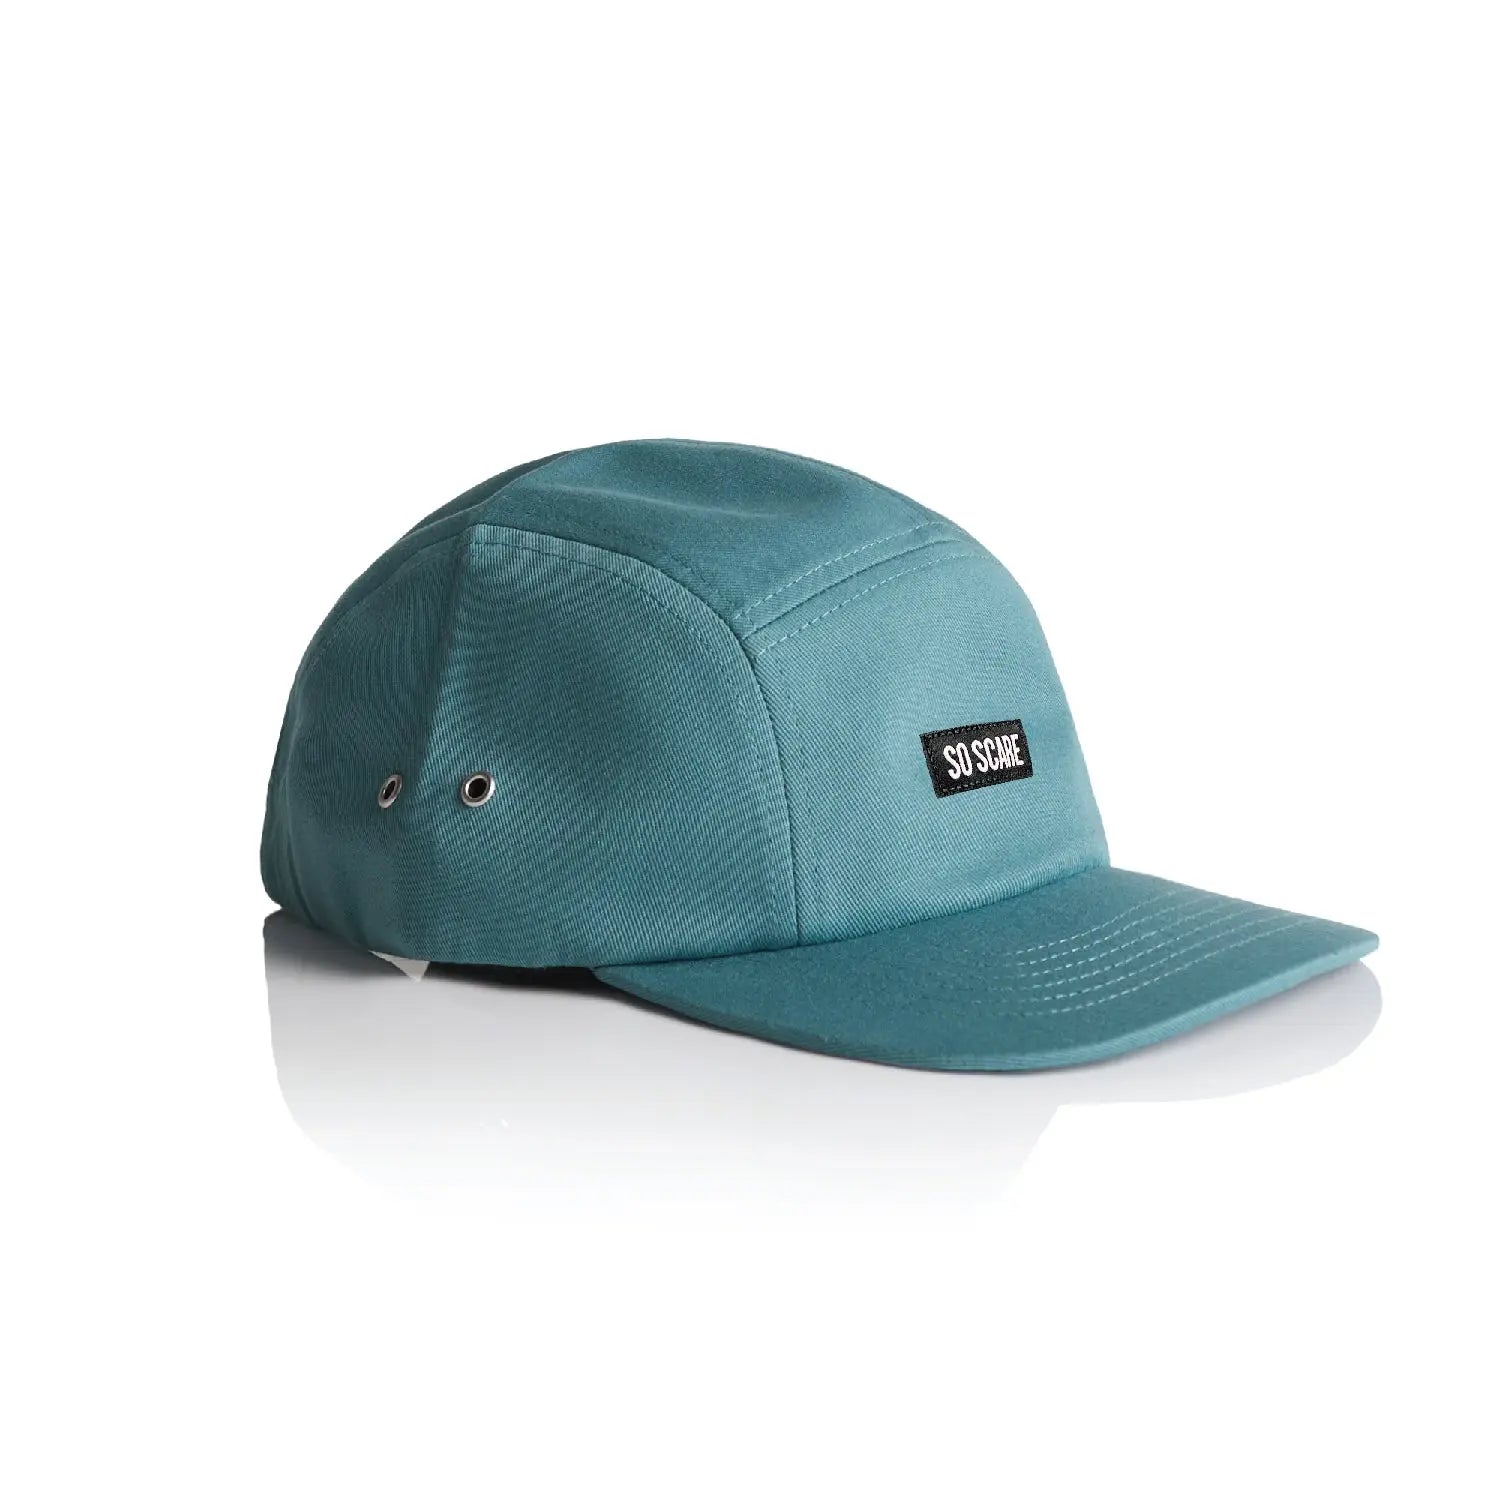 5 PANEL HAT - ICE SO SCARE SOCIAL CLUB